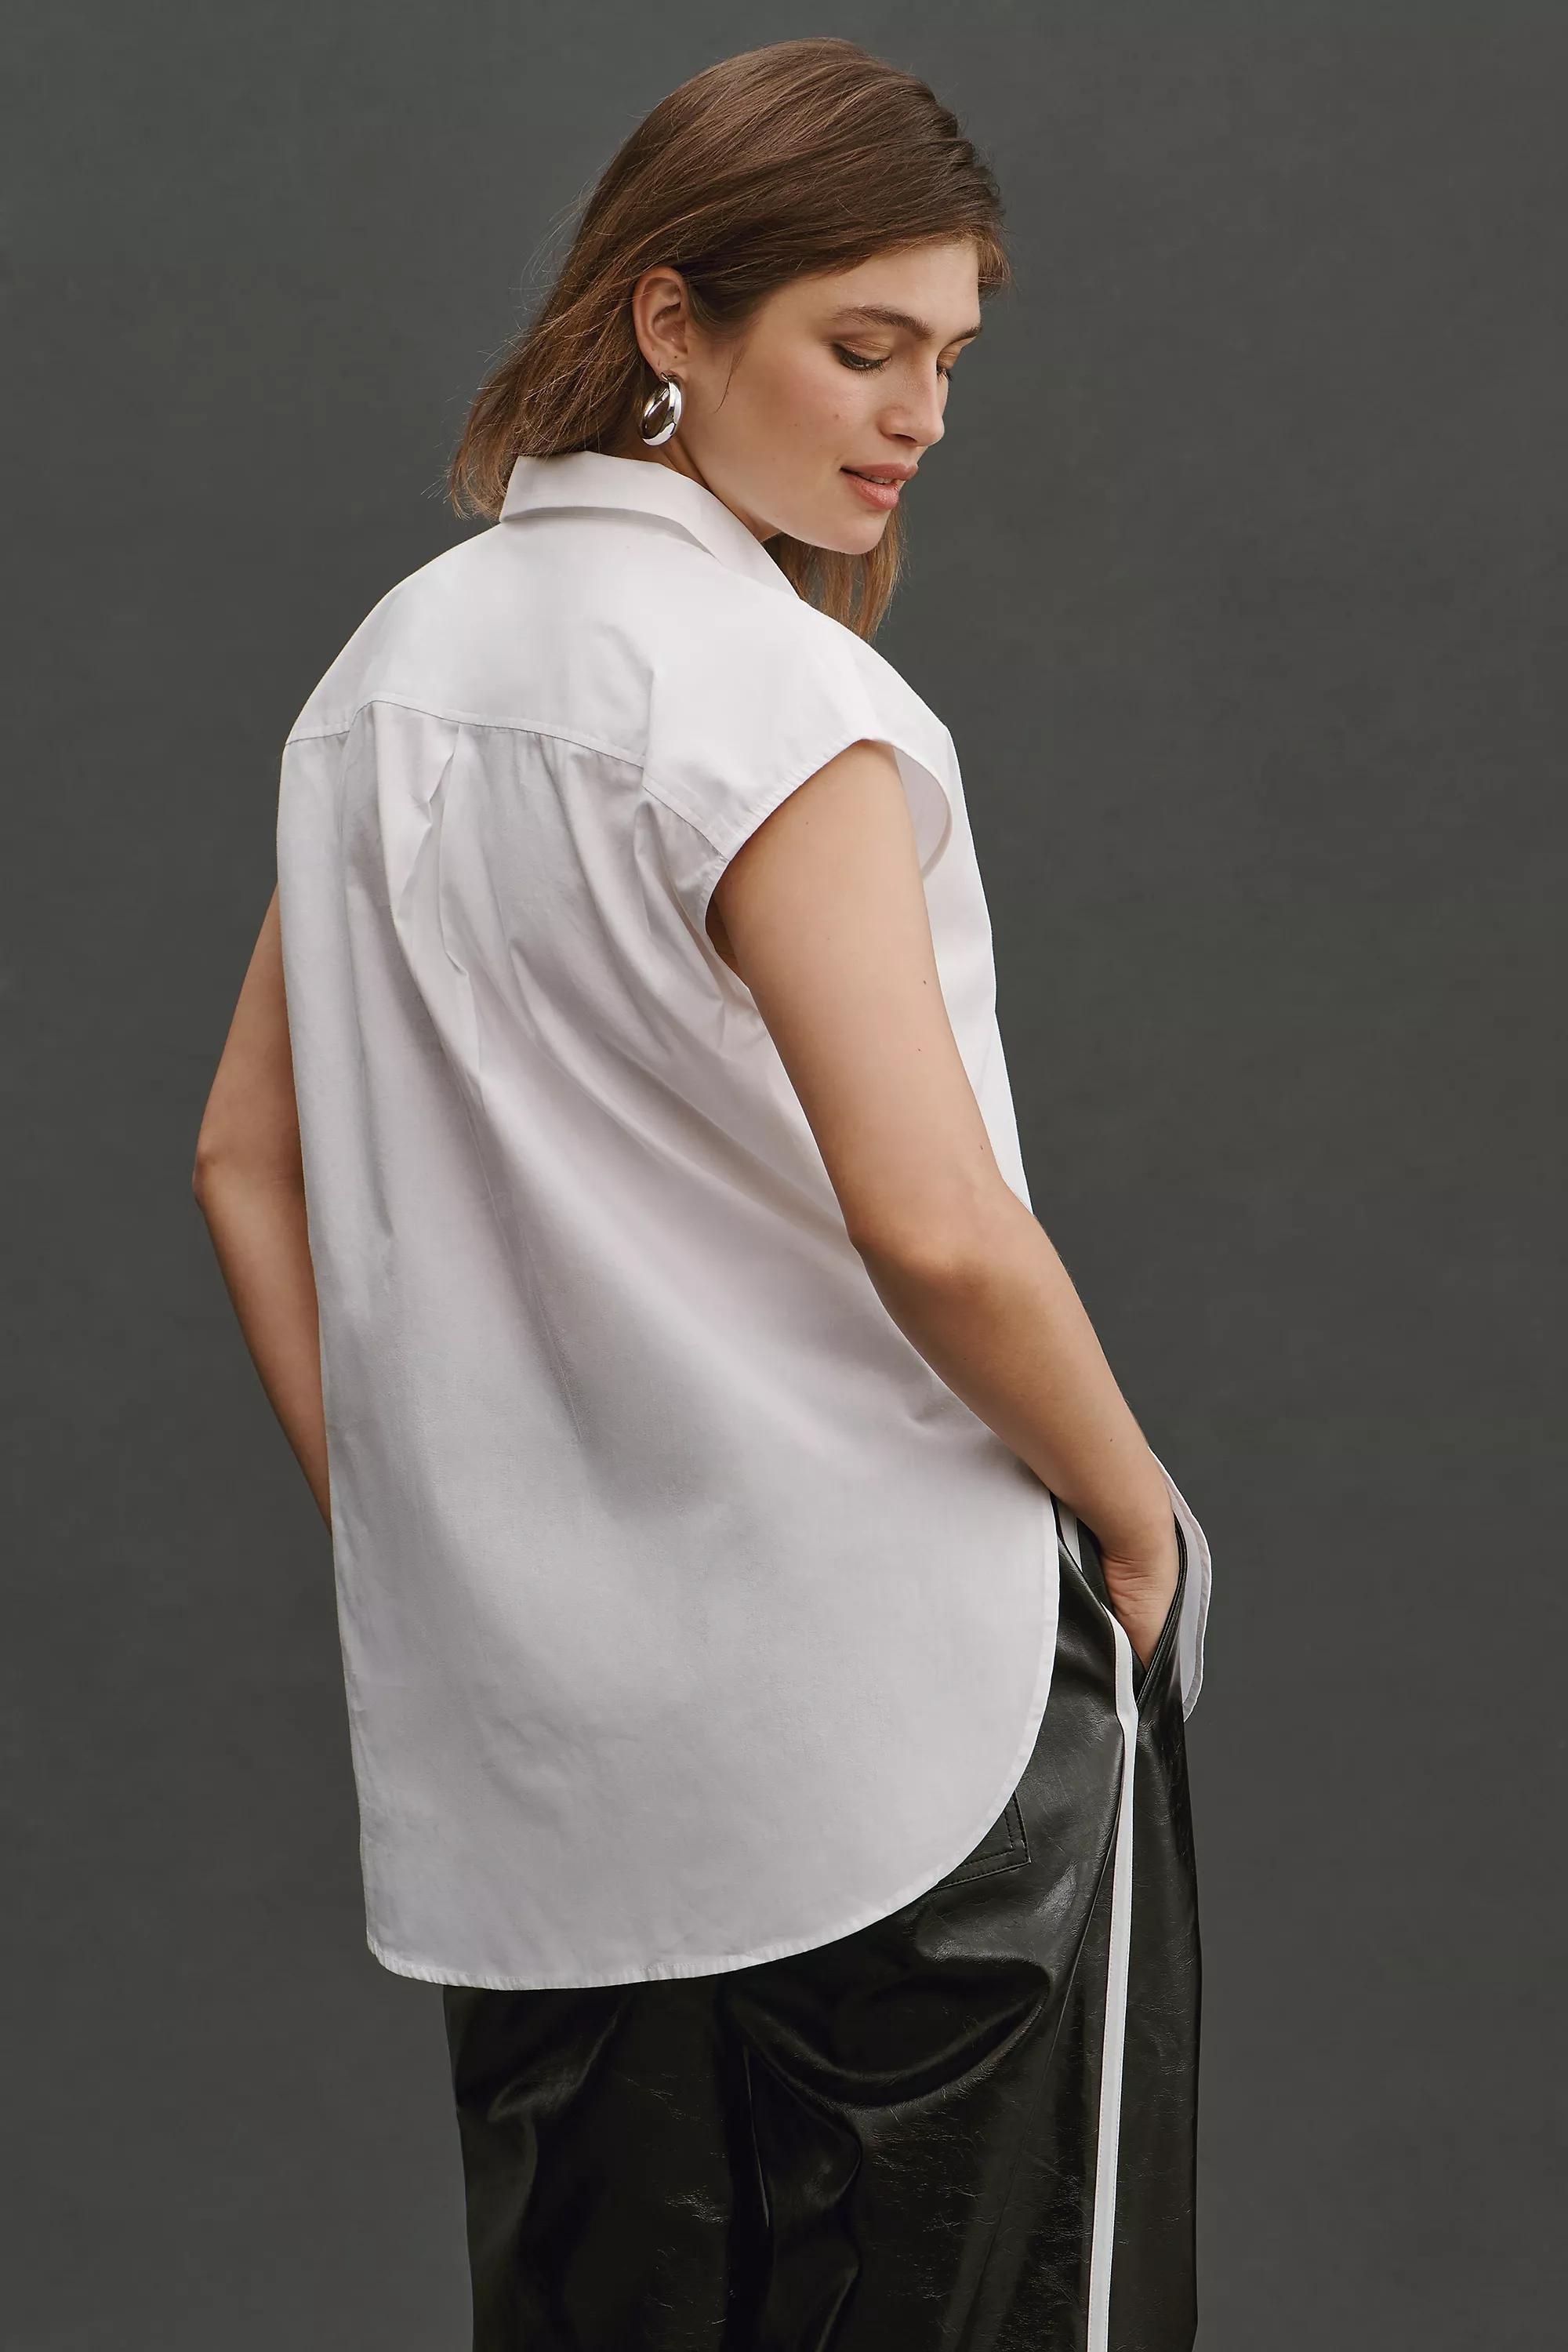 Anthropologie - The Bennet Buttondown Shirt By Maeve: Sleeveless Edition, White